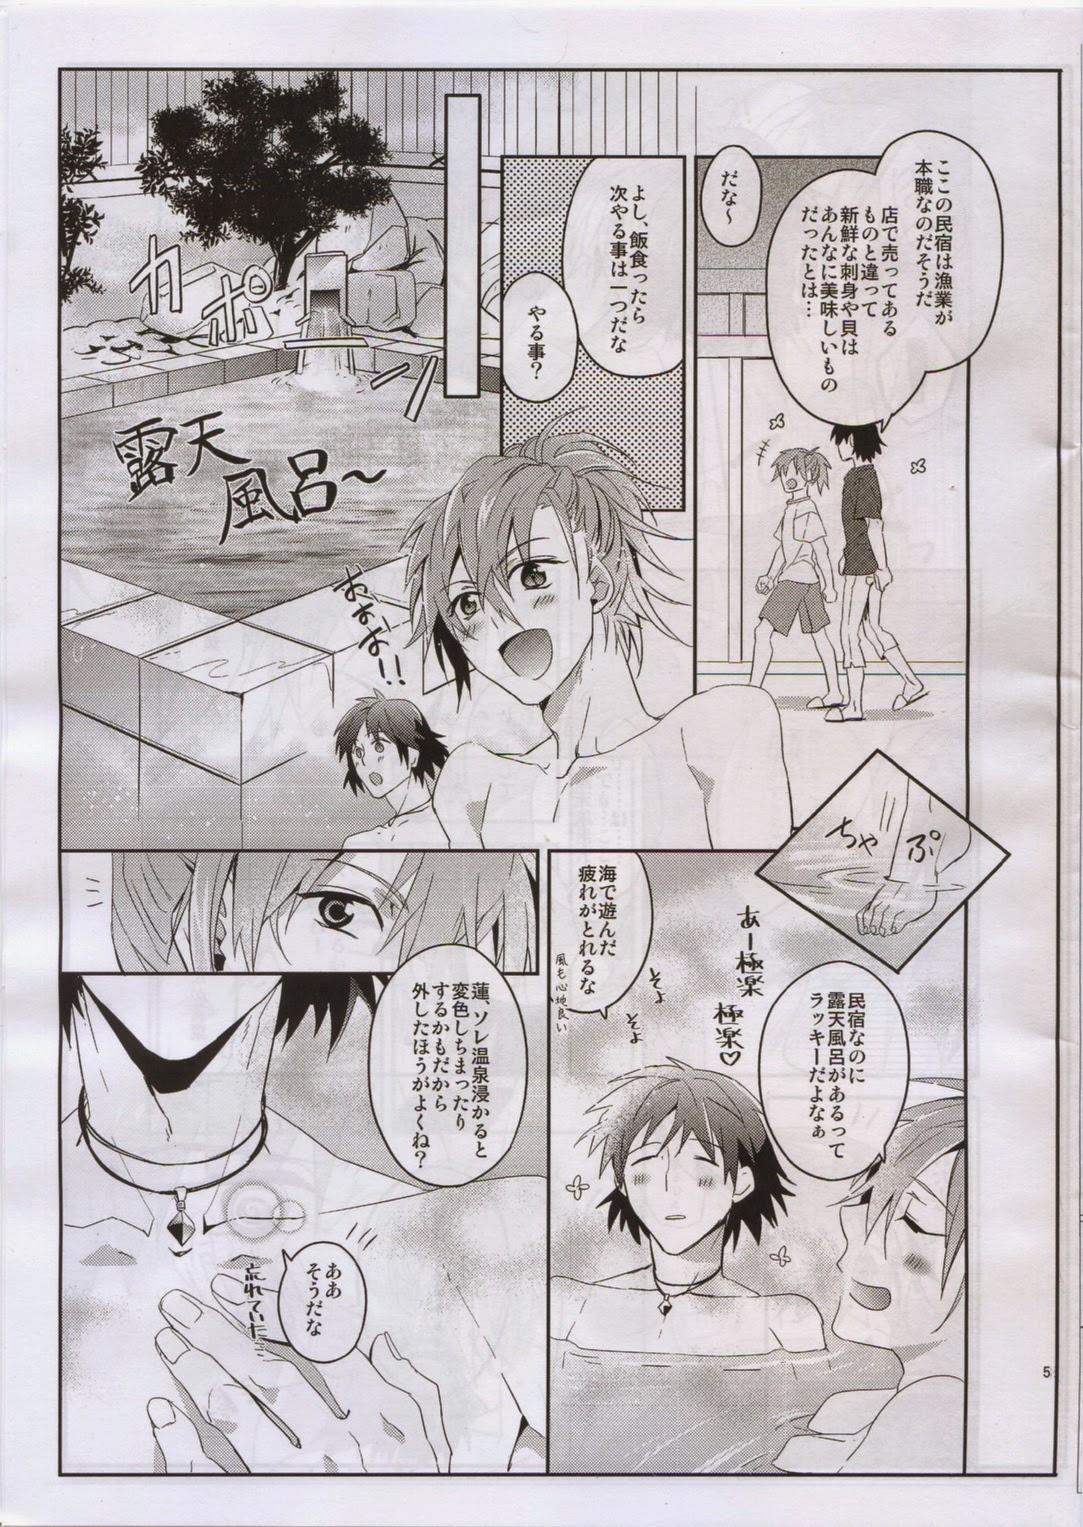 Punish After Summer Time - Dramatical murder Pegging - Page 6